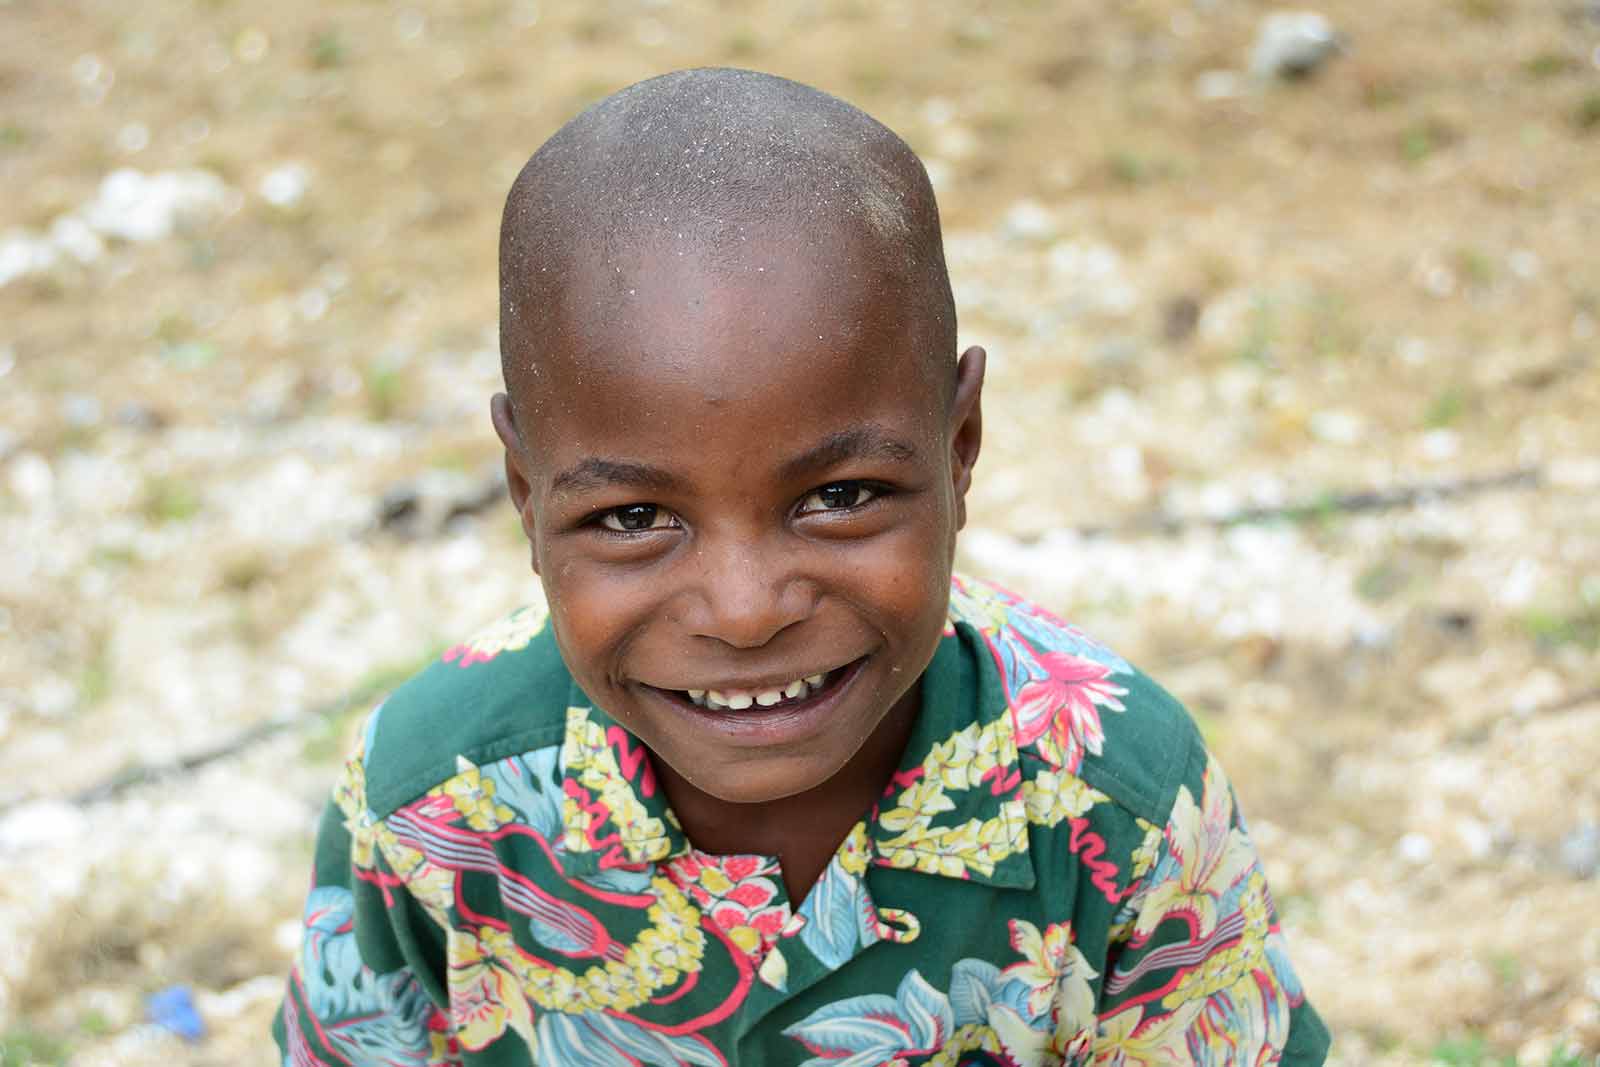 Haiti Health Initiative Photography (Pictures of Locals #4) - April Stout